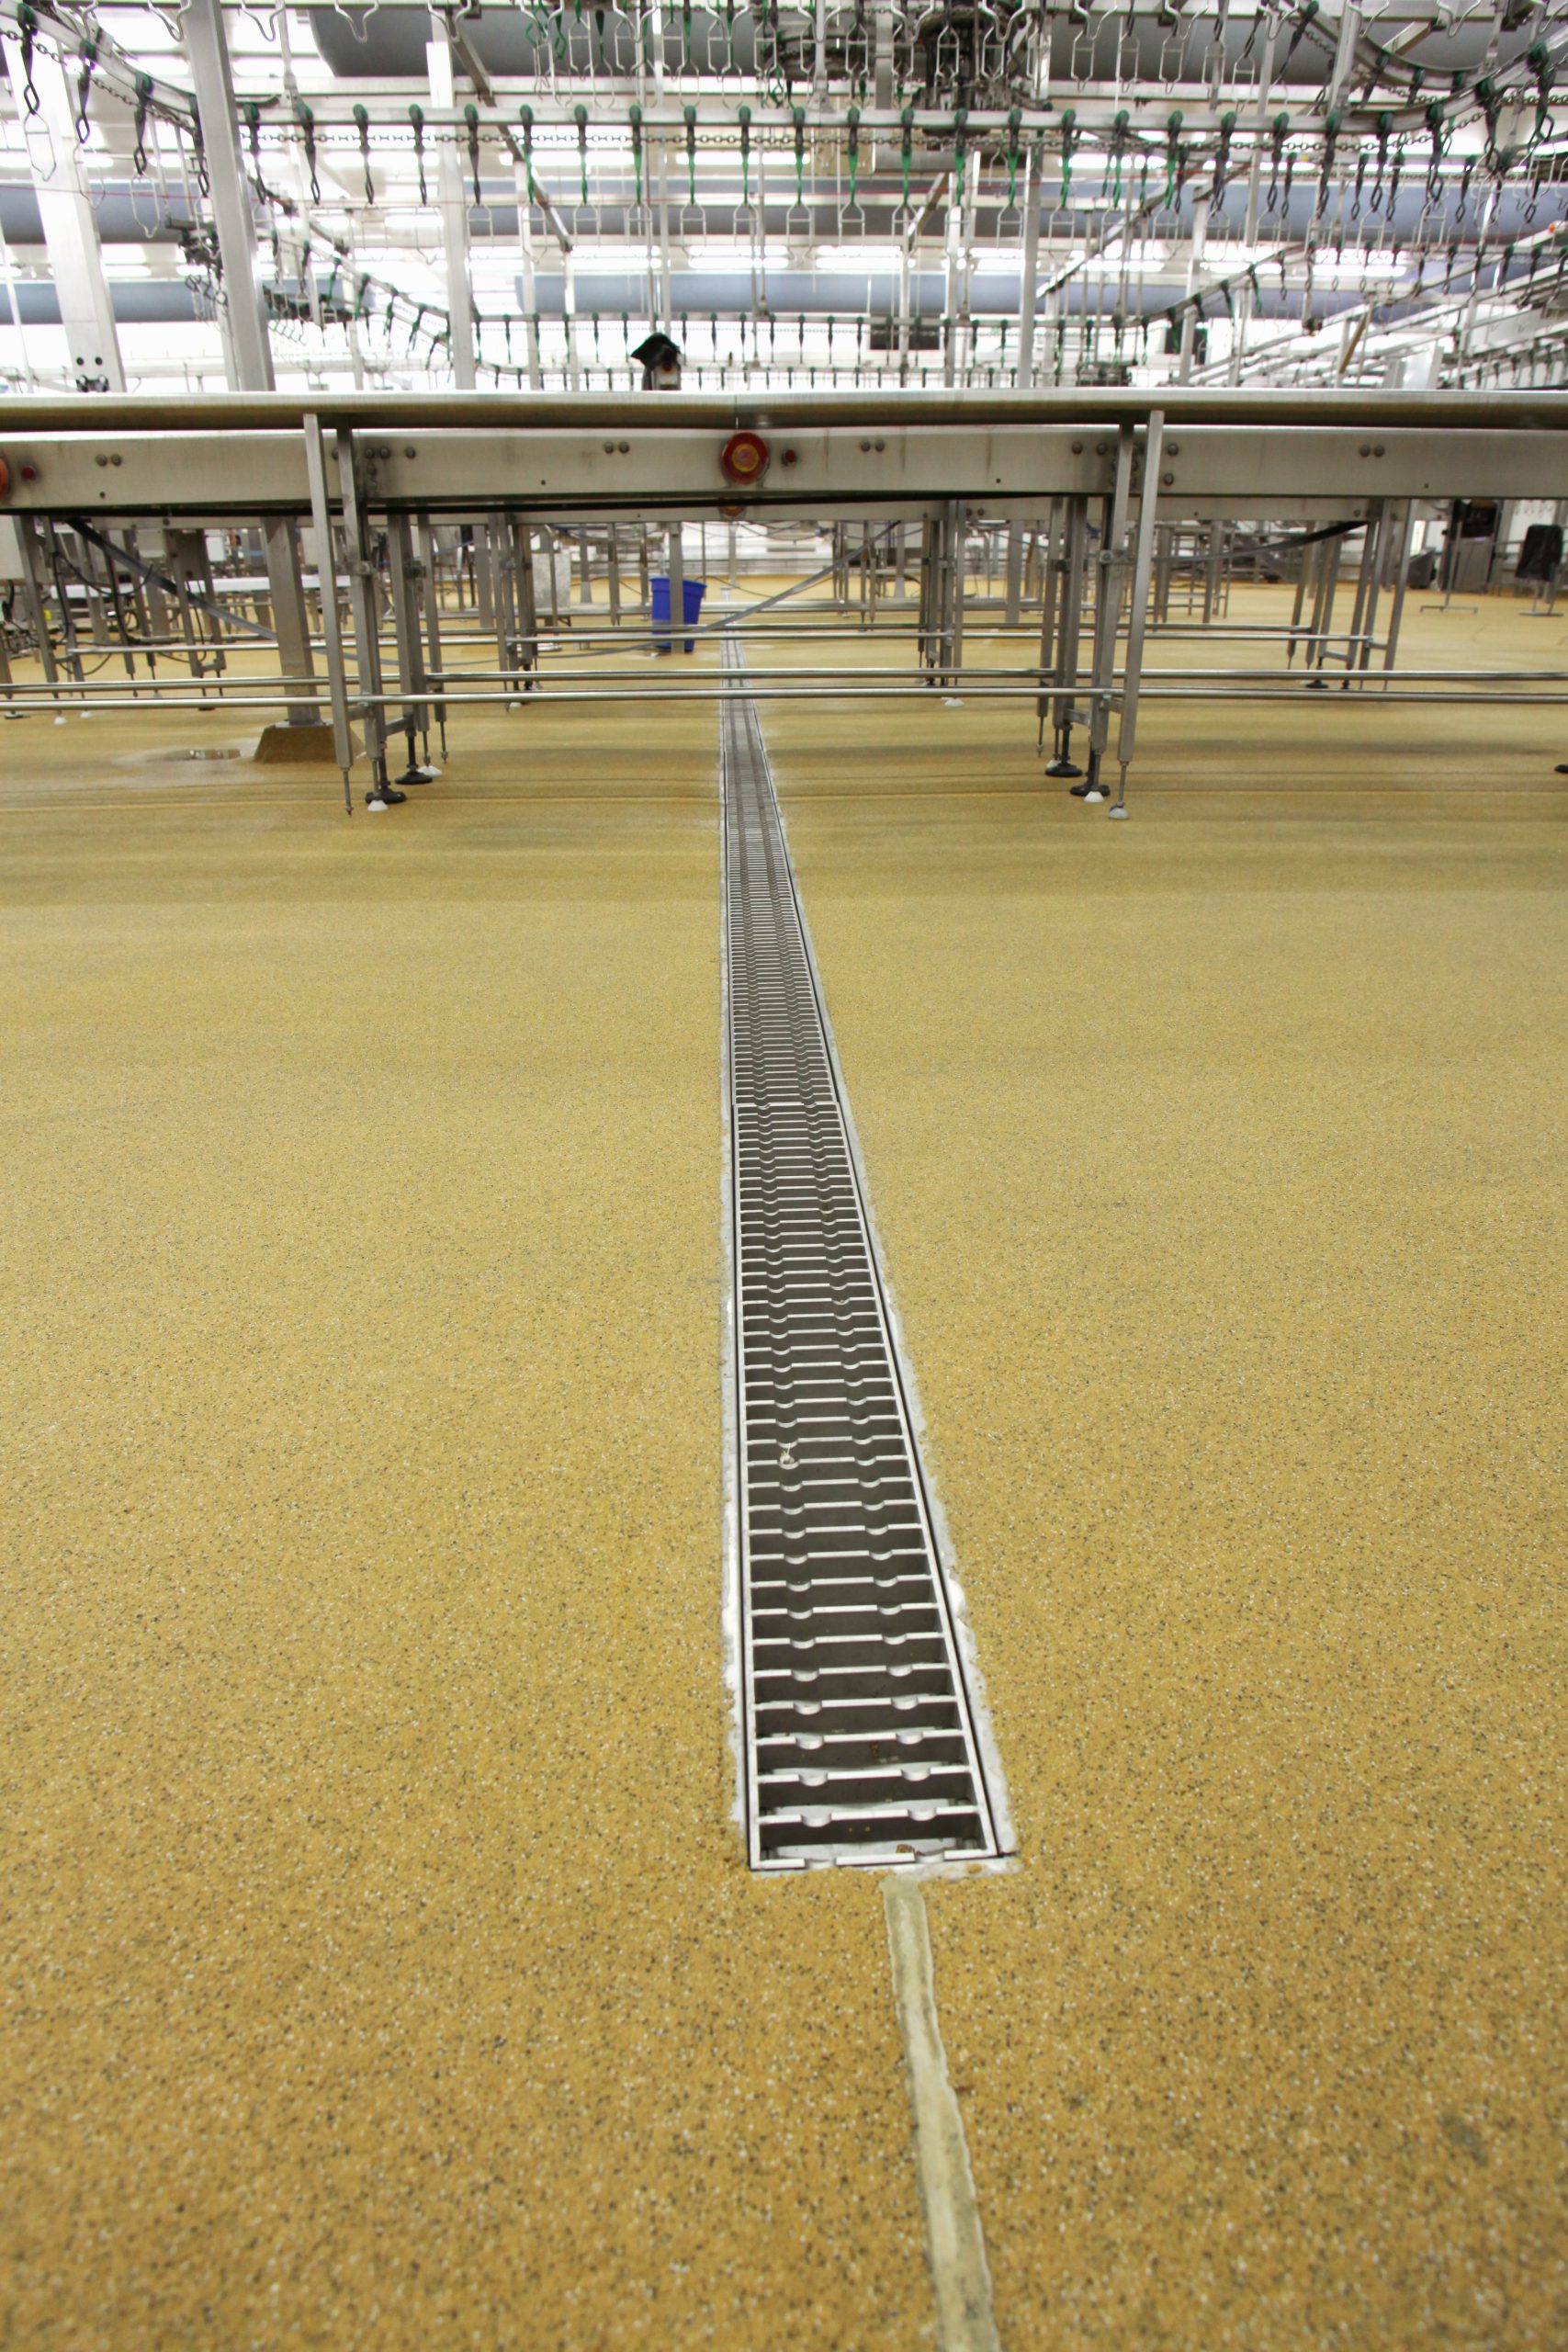 Drain for Major Food Processor Complete Resin Flooring Packages For The Food Industry.